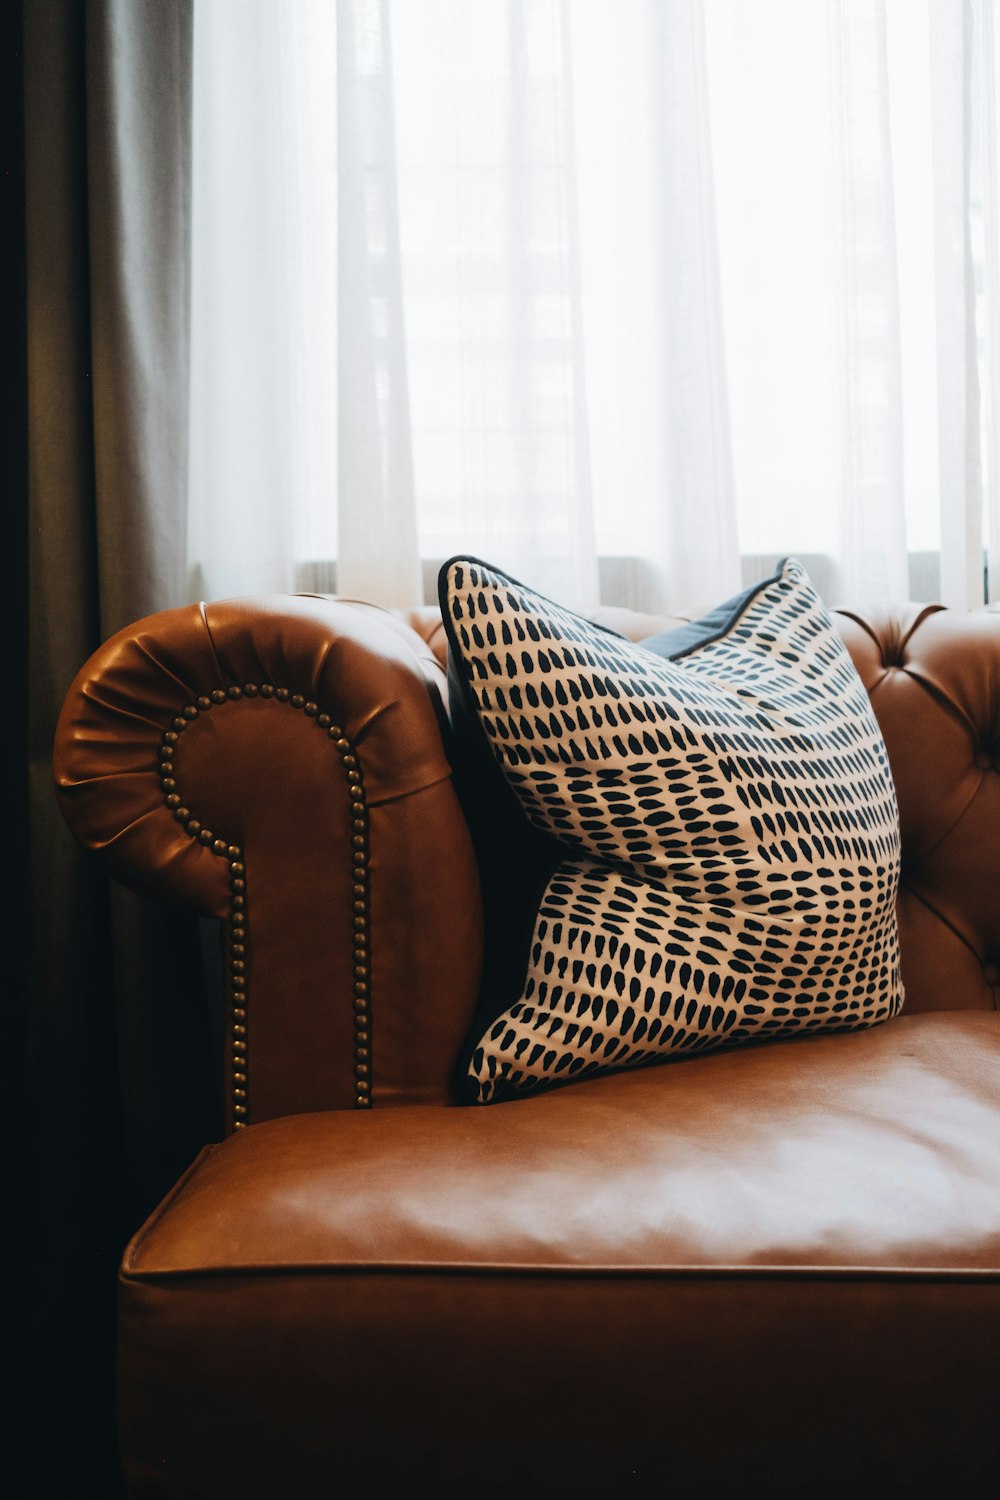 Brown Leather Couch Photo, Throw Pillows On Black Leather Couch